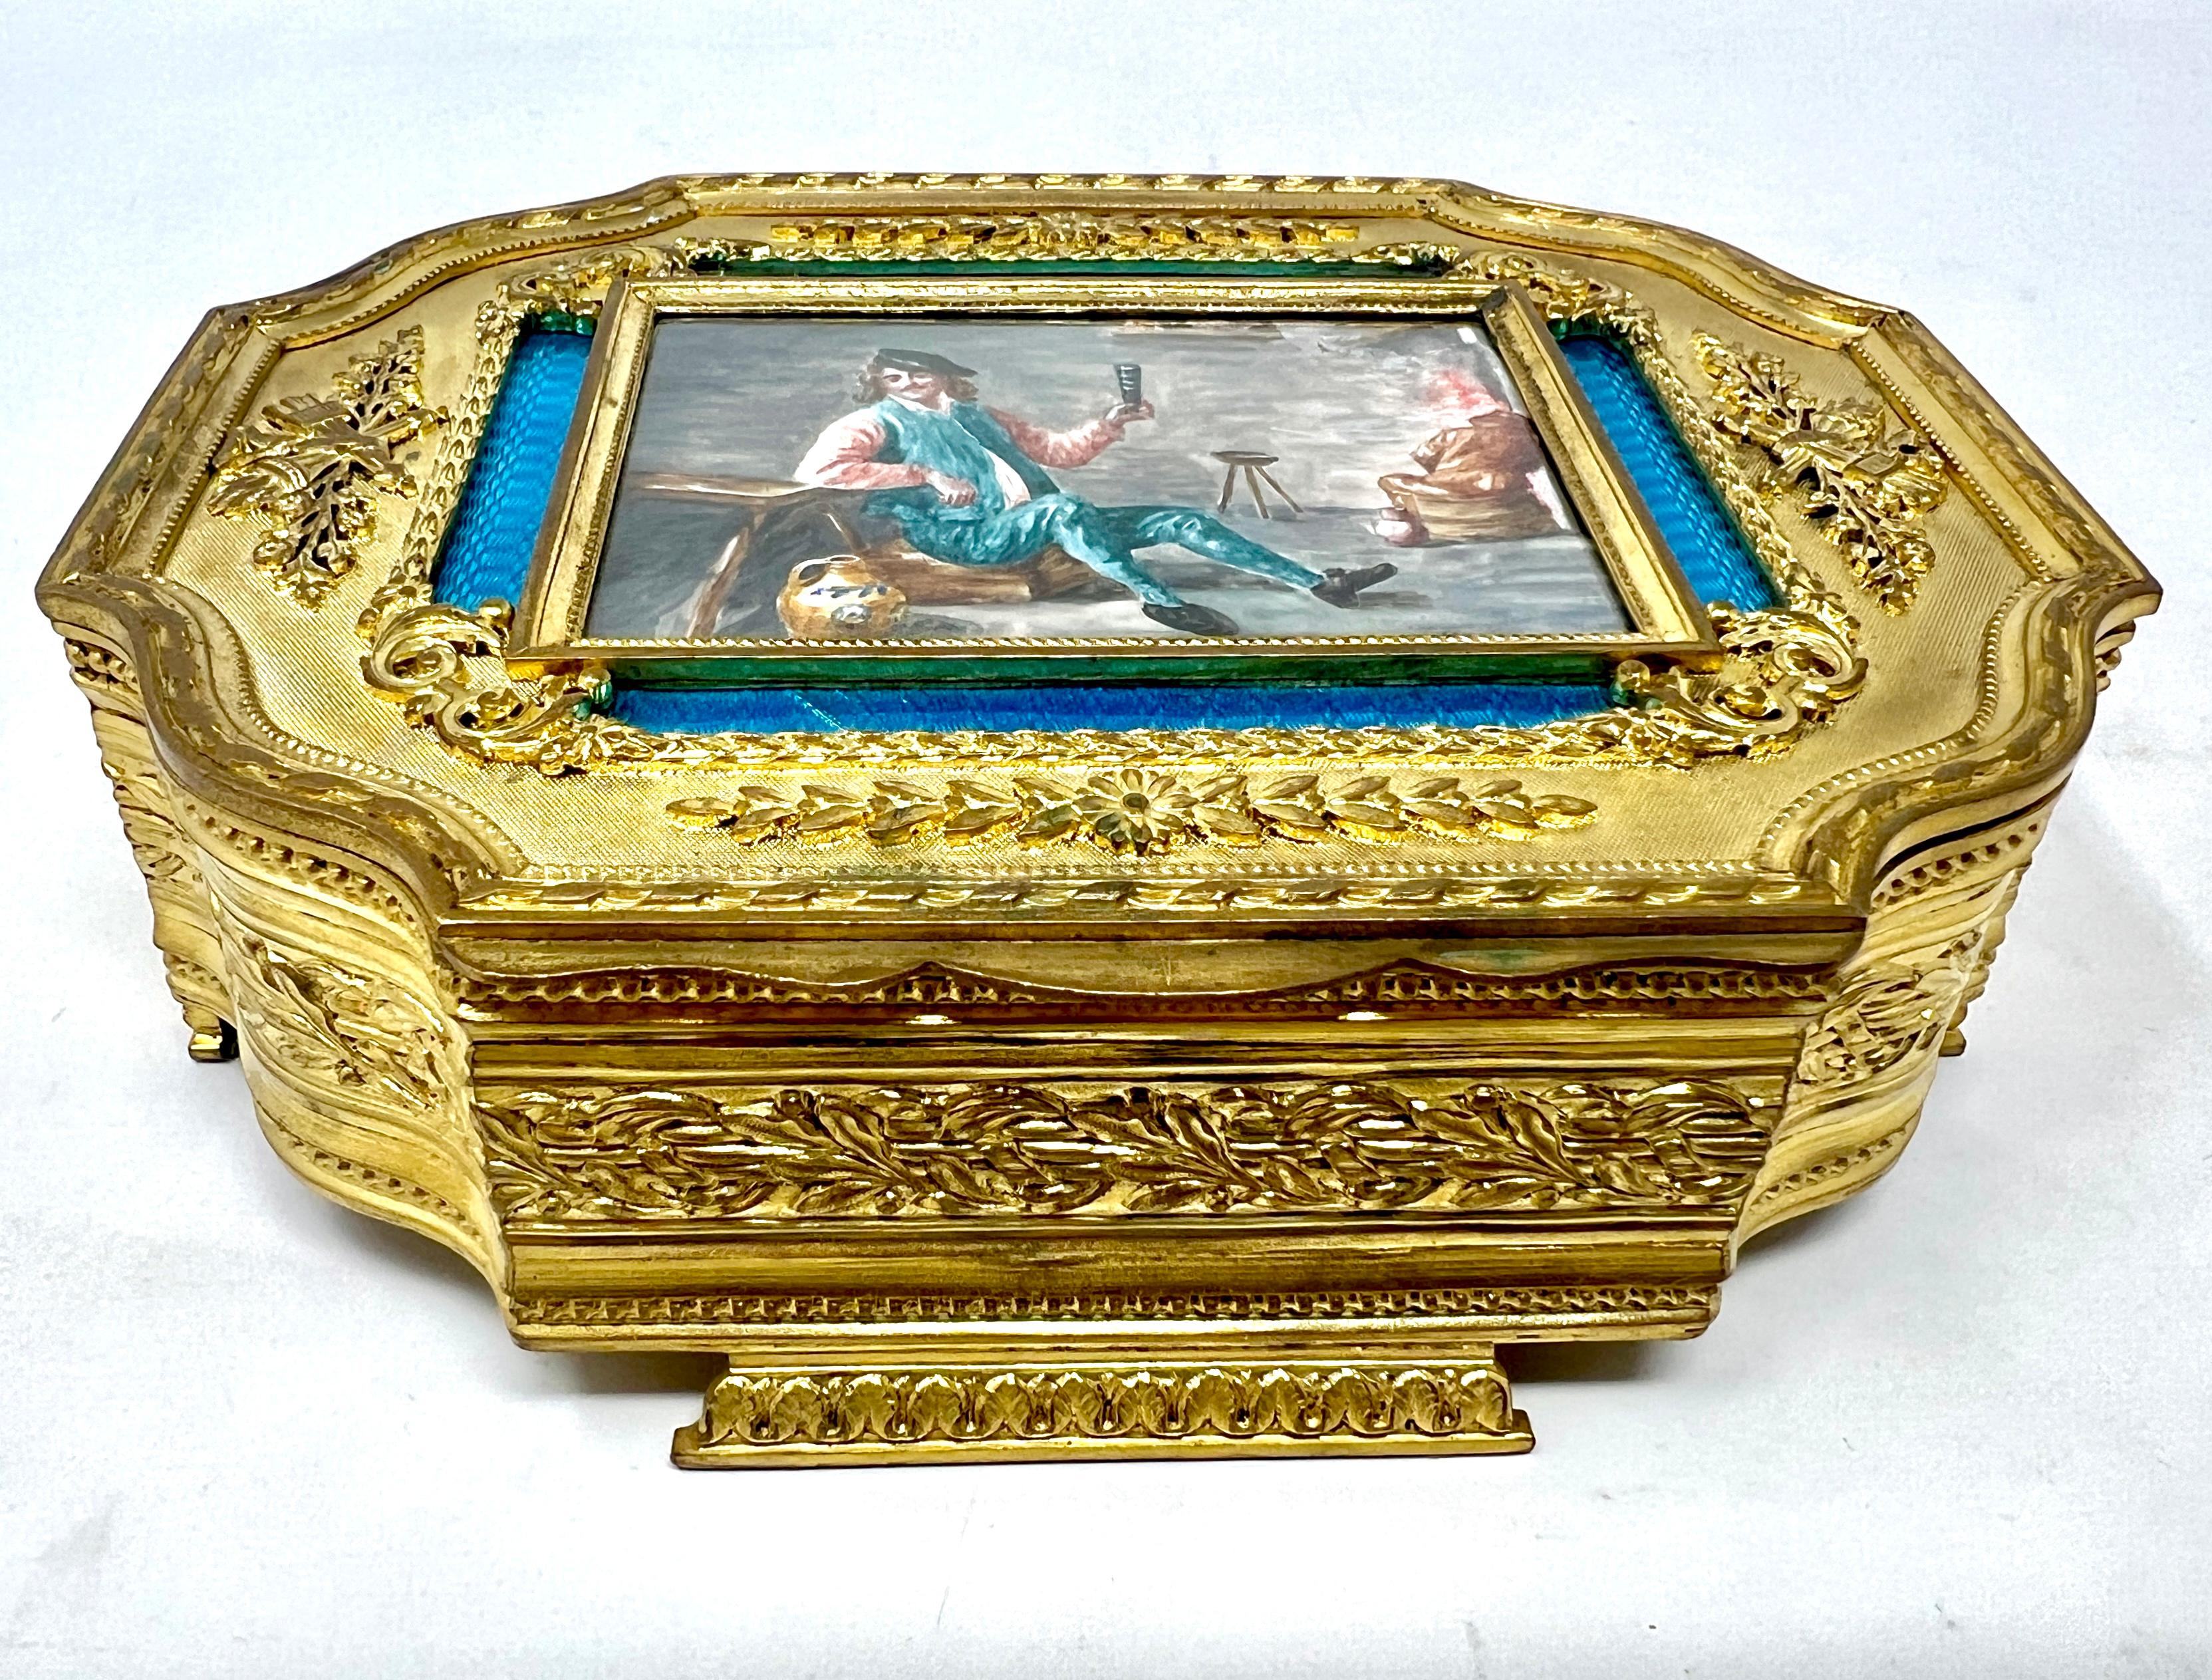 20th Century Antique French Blue Enameled Porcelain and Gold Bronze Jewel Box, Circa 1910. For Sale